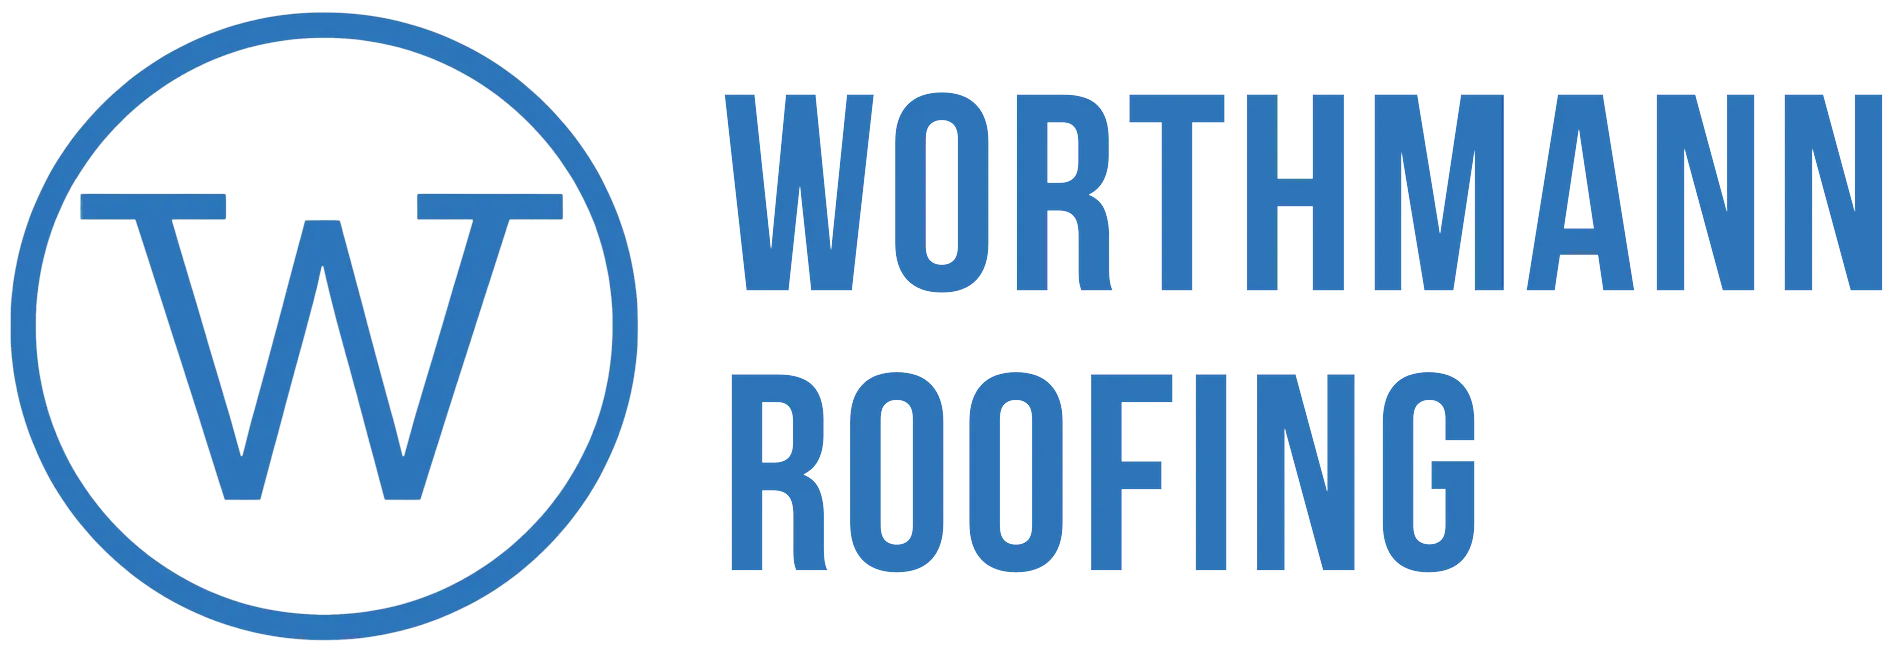 the logo for worthmann roofing is blue and white